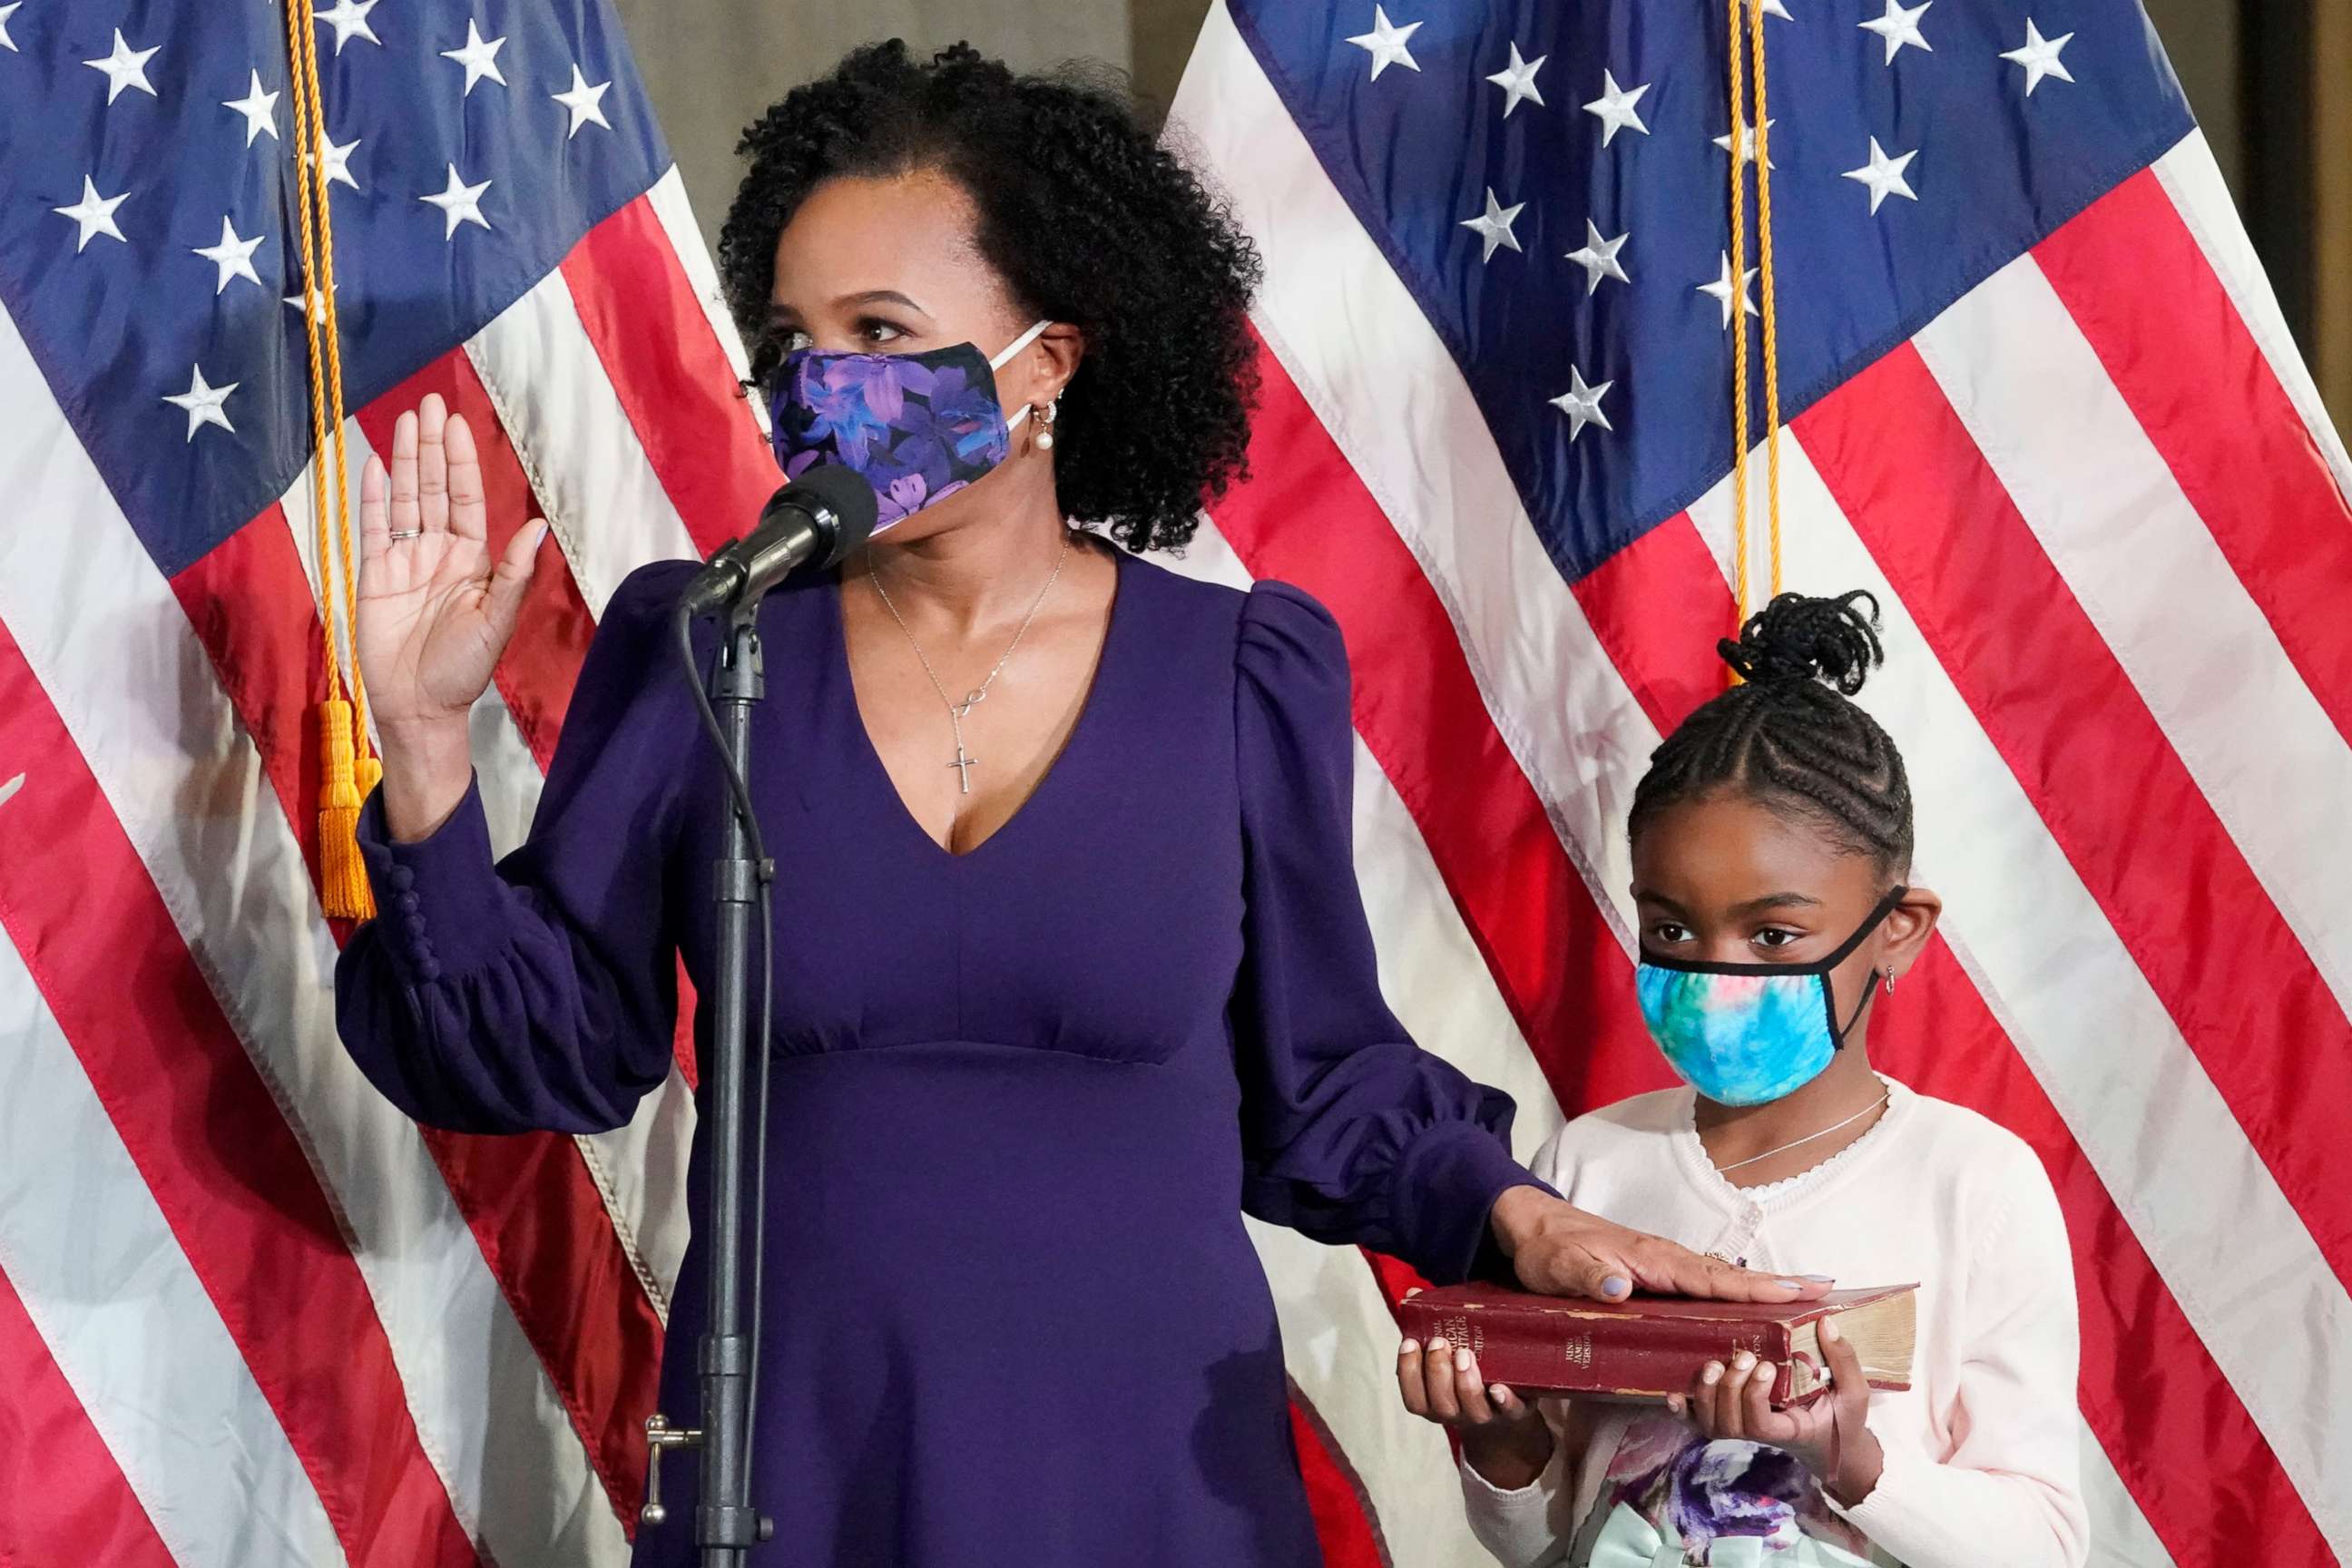 PHOTO: Former Boston City Council President Kim Janey, 55, is sworn in as Boston's new mayor at City Hall while her granddaughter, Rosie, holds a Bible, March 24, 2021, in Boston.